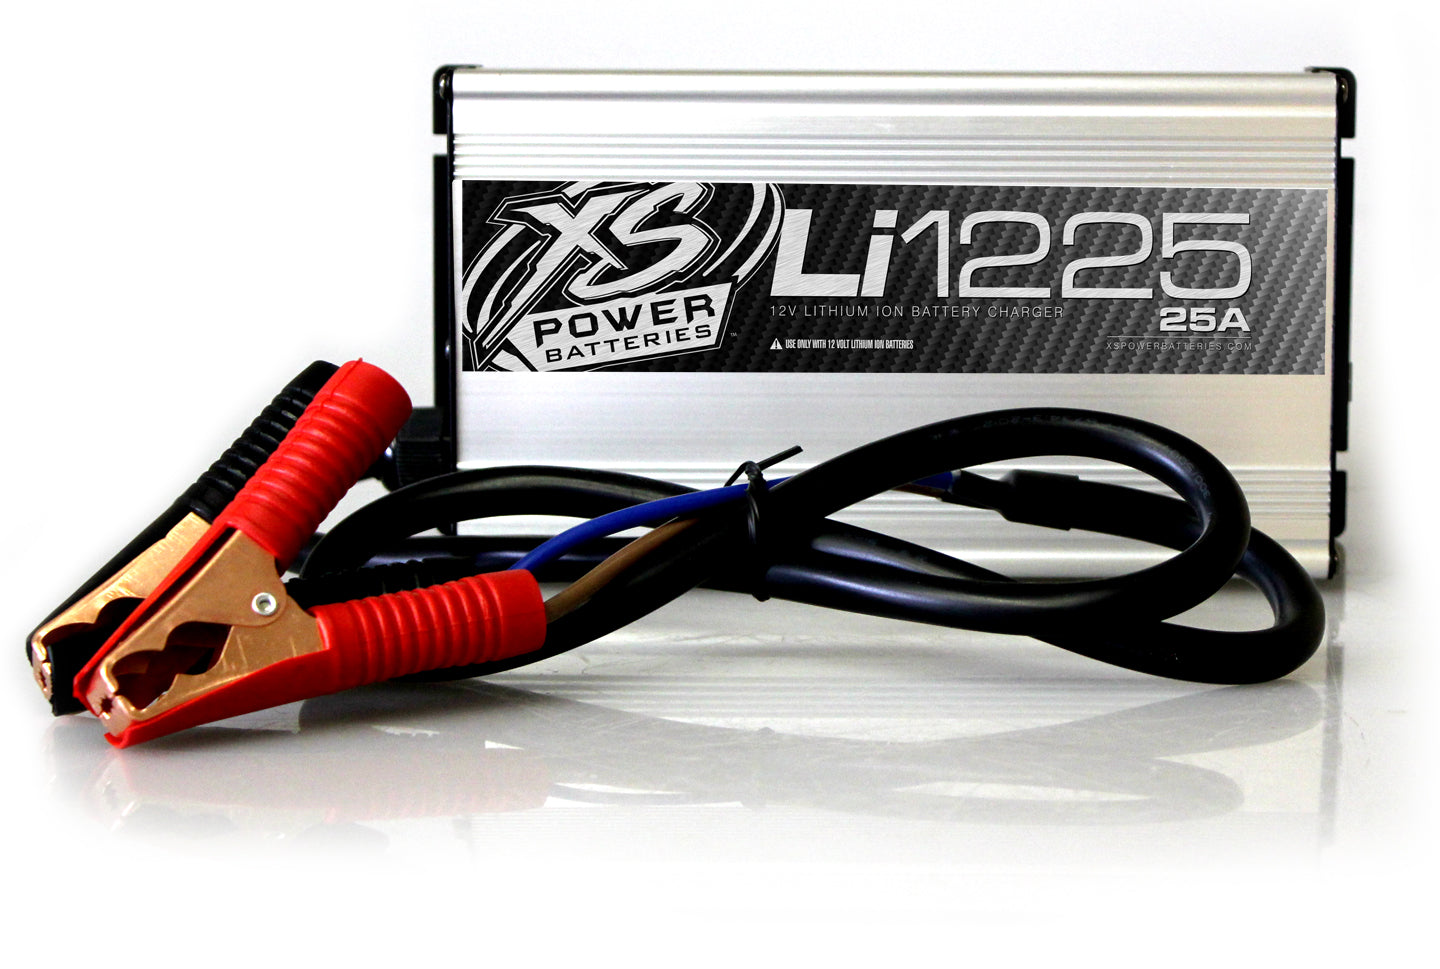 XS Power Li1225 12V Lithium Ion Battery Charger 25A